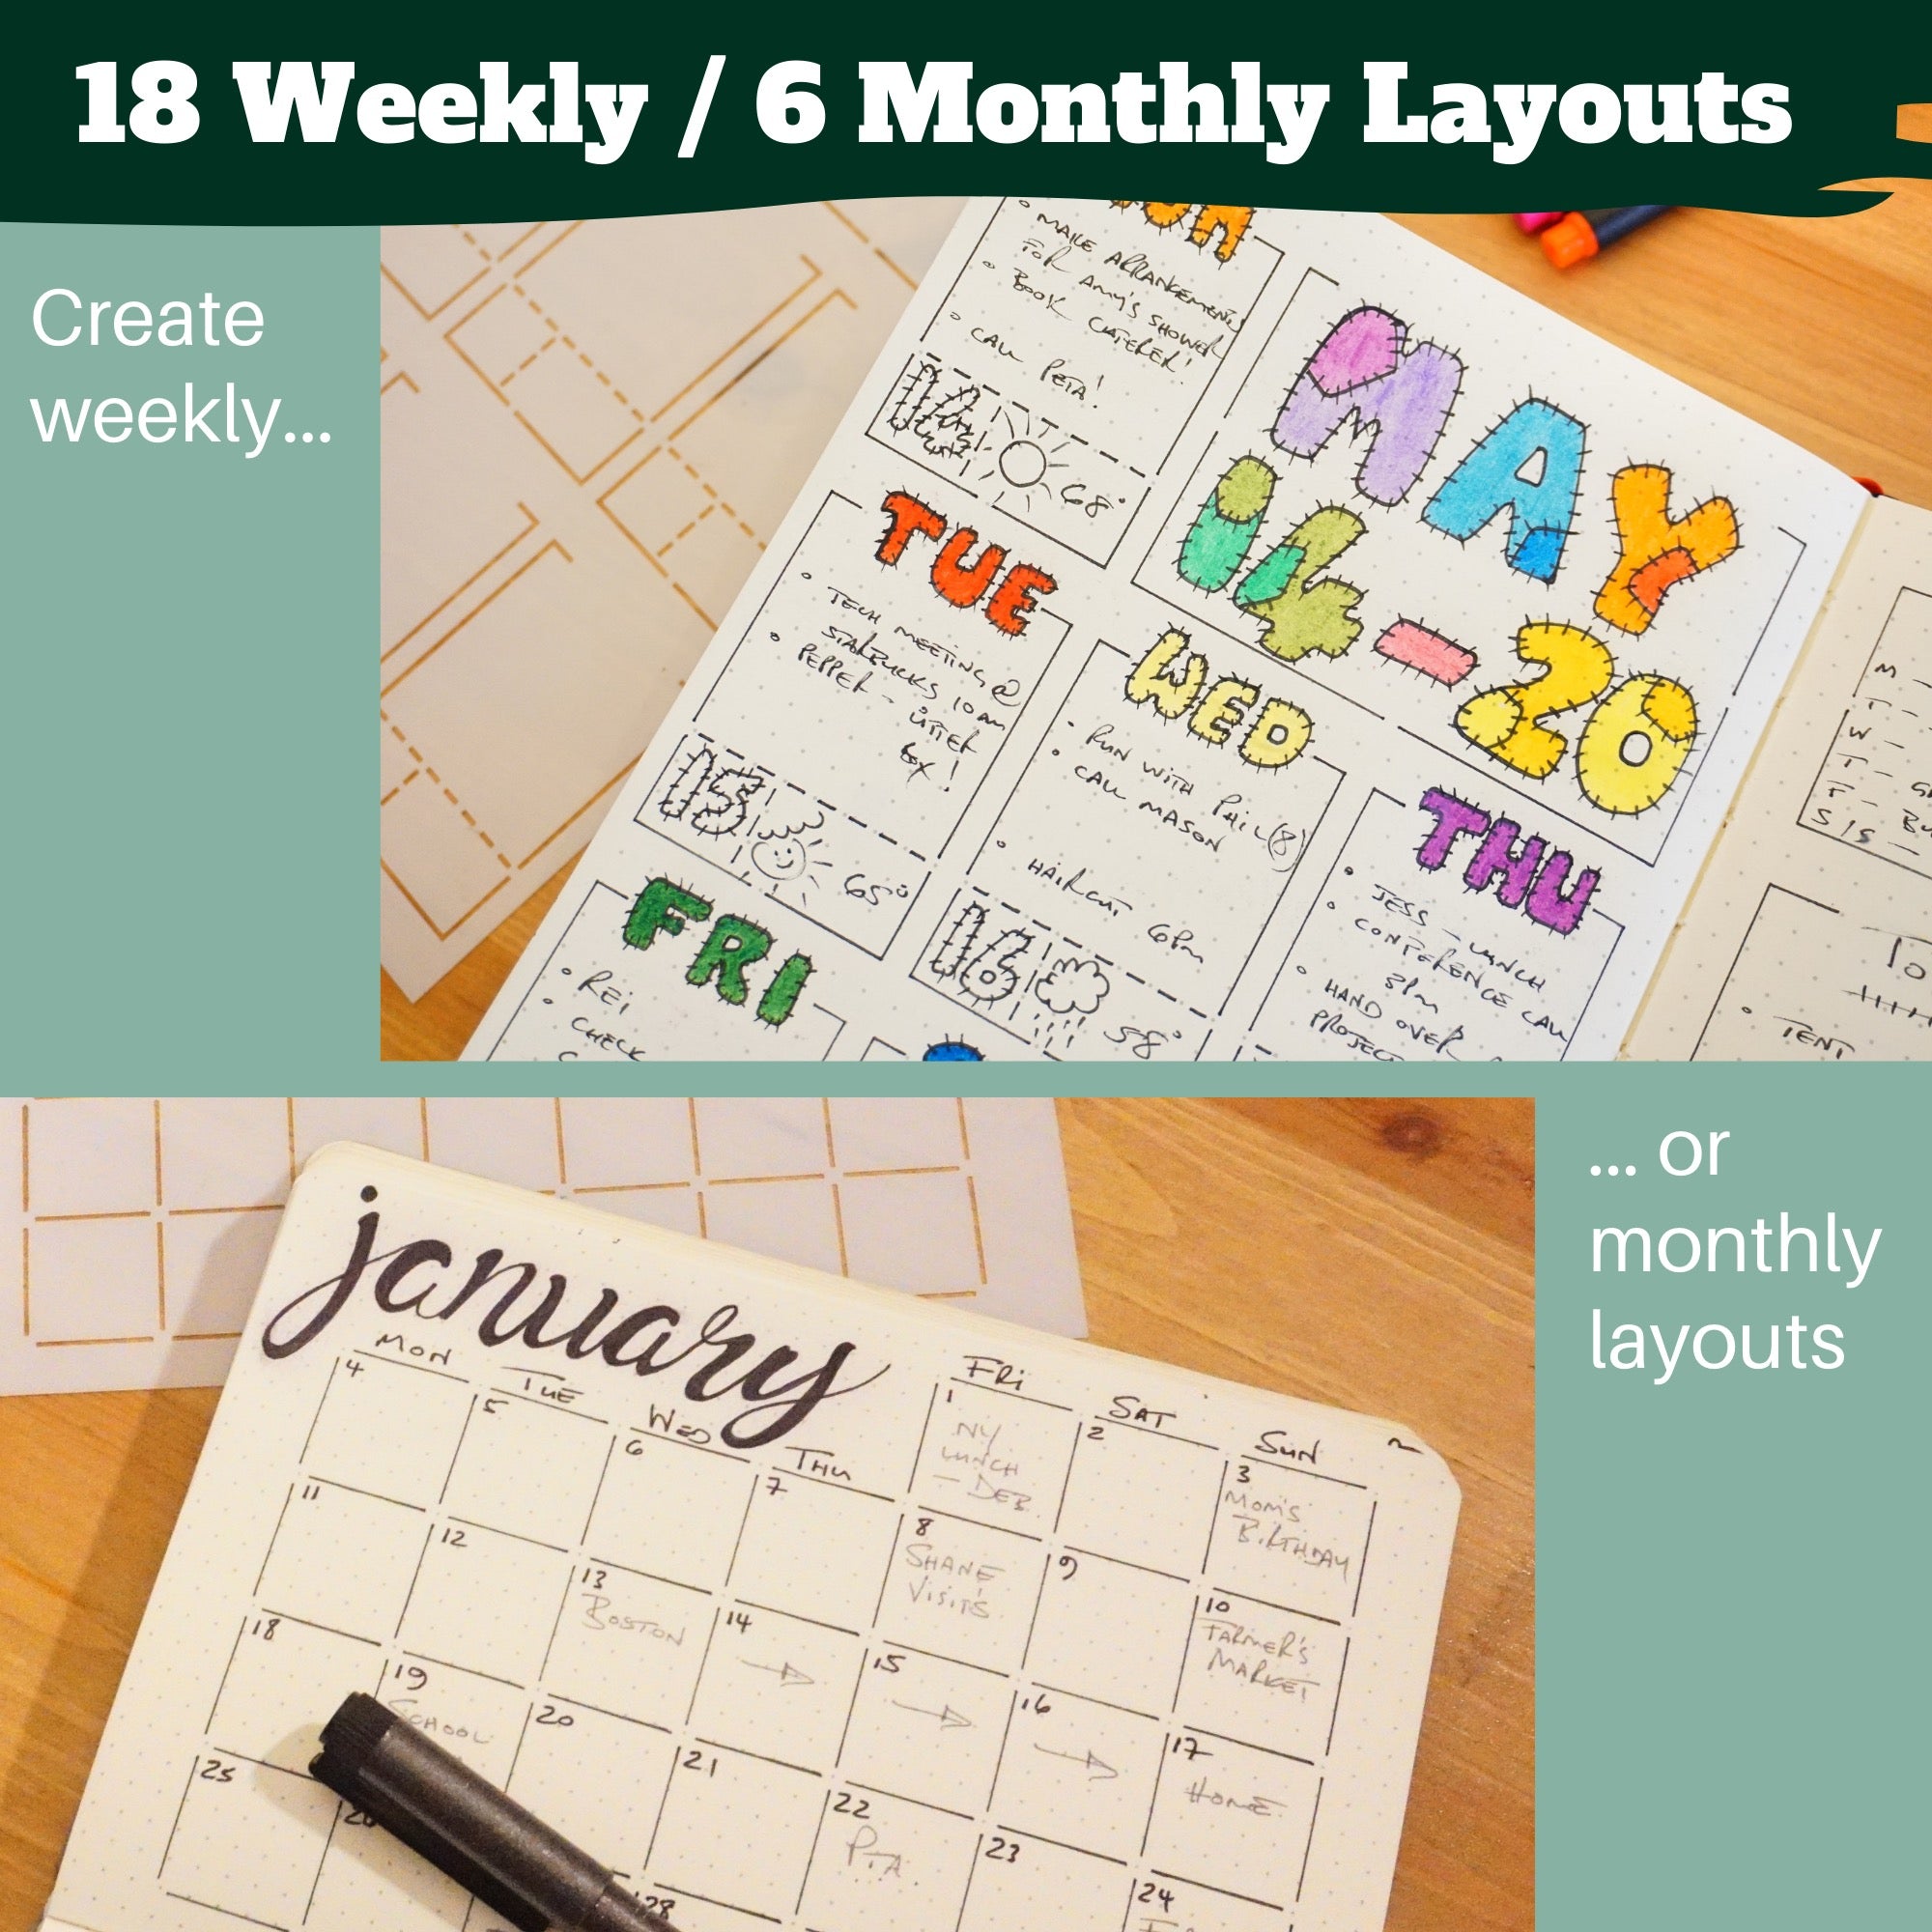  Speedy Spreads Journal Stencils (Weekly Layouts #3) - x6  Stencils for A5 Bullet Dot Grid Journal Notebook, Save Time on Full-Page  Layouts, DIY Planner Templates for Productivity by Sunny Streak 